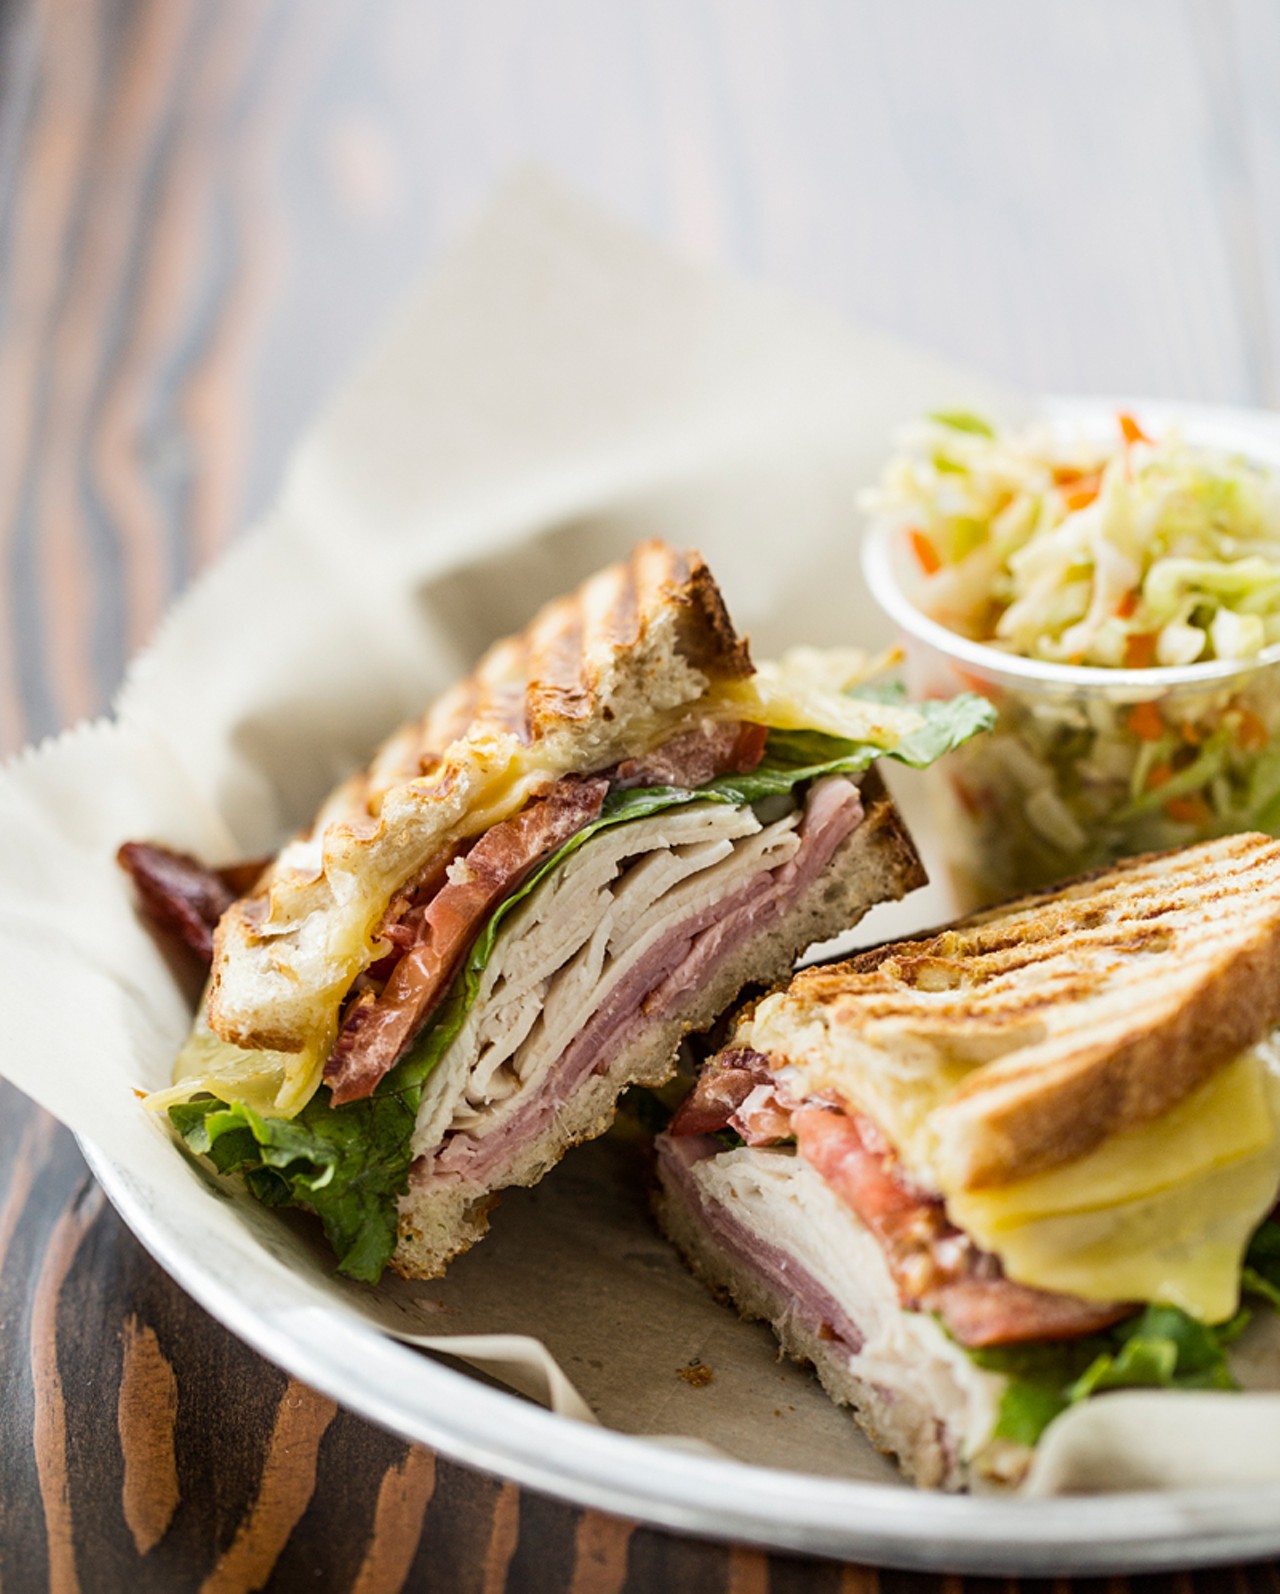 The club sandwich is made with turkey, ham, bacon, lettuce, tomato, cheese and aioli.